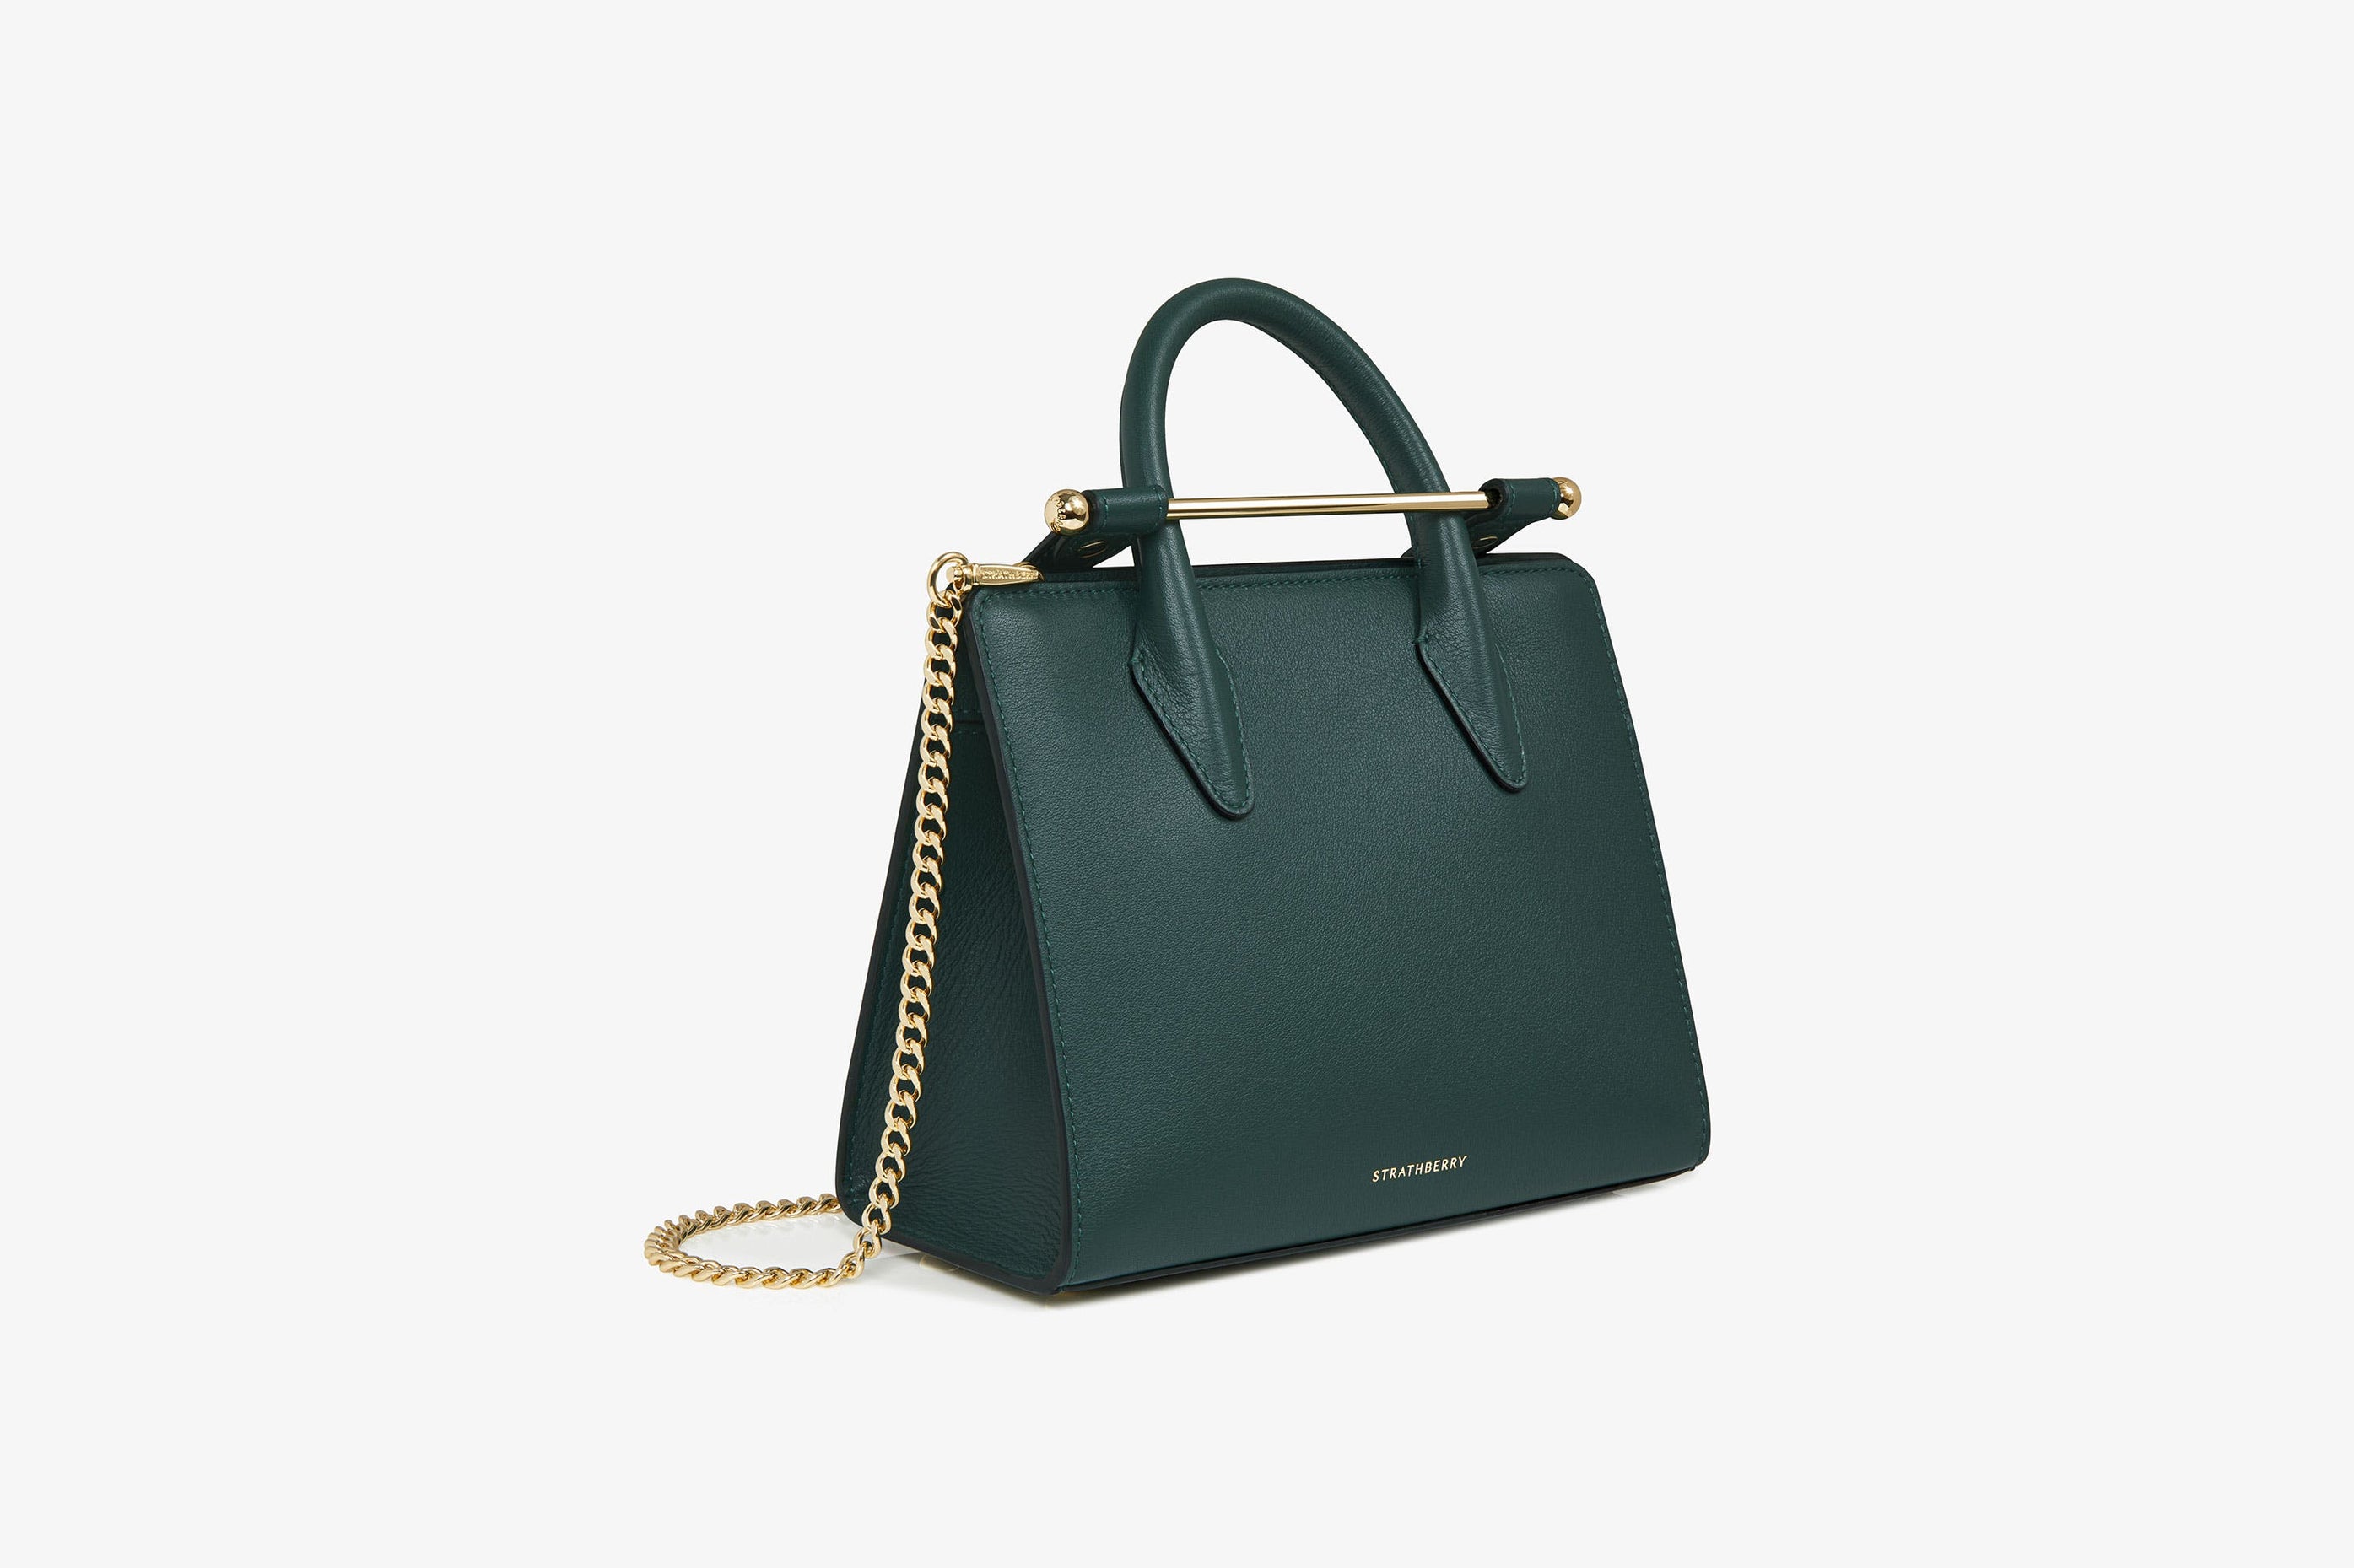 A view showcasing our The Strathberry Mini Tote - Bottle Green